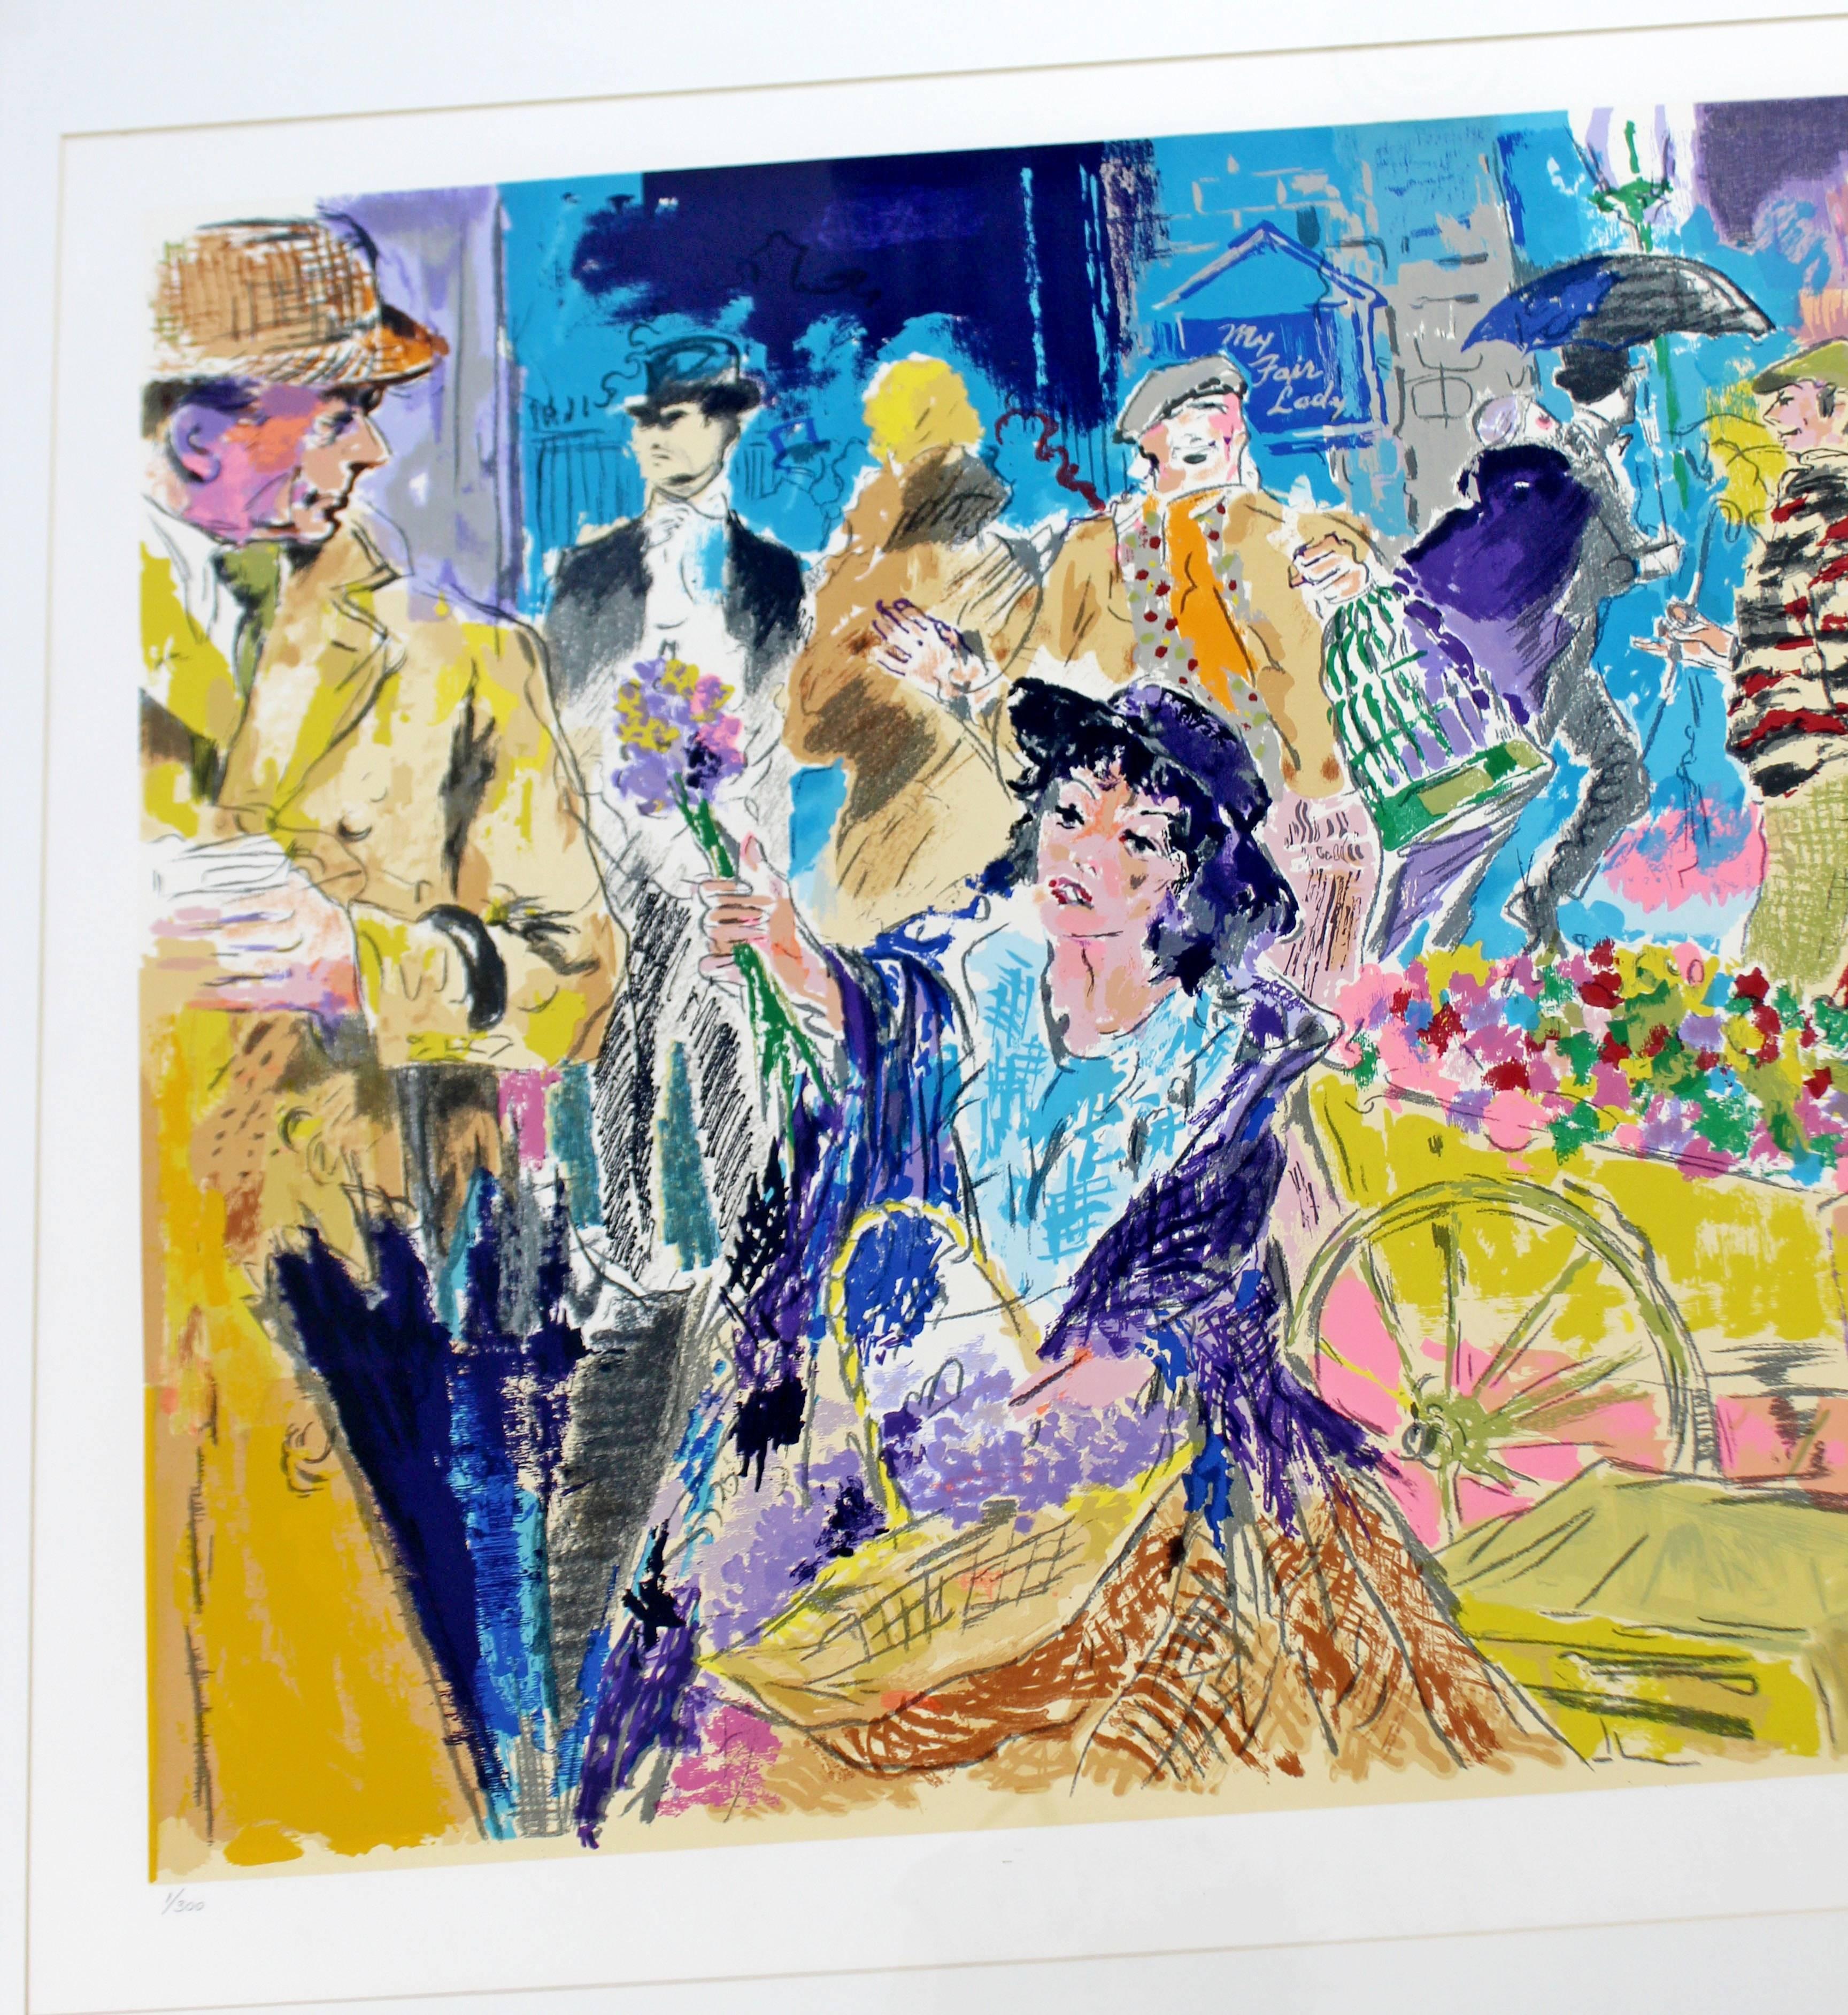 Late 20th Century Mid-Century Modern Leroy Neiman Litho Signed Numbered 1/300 My Fair Lady Framed